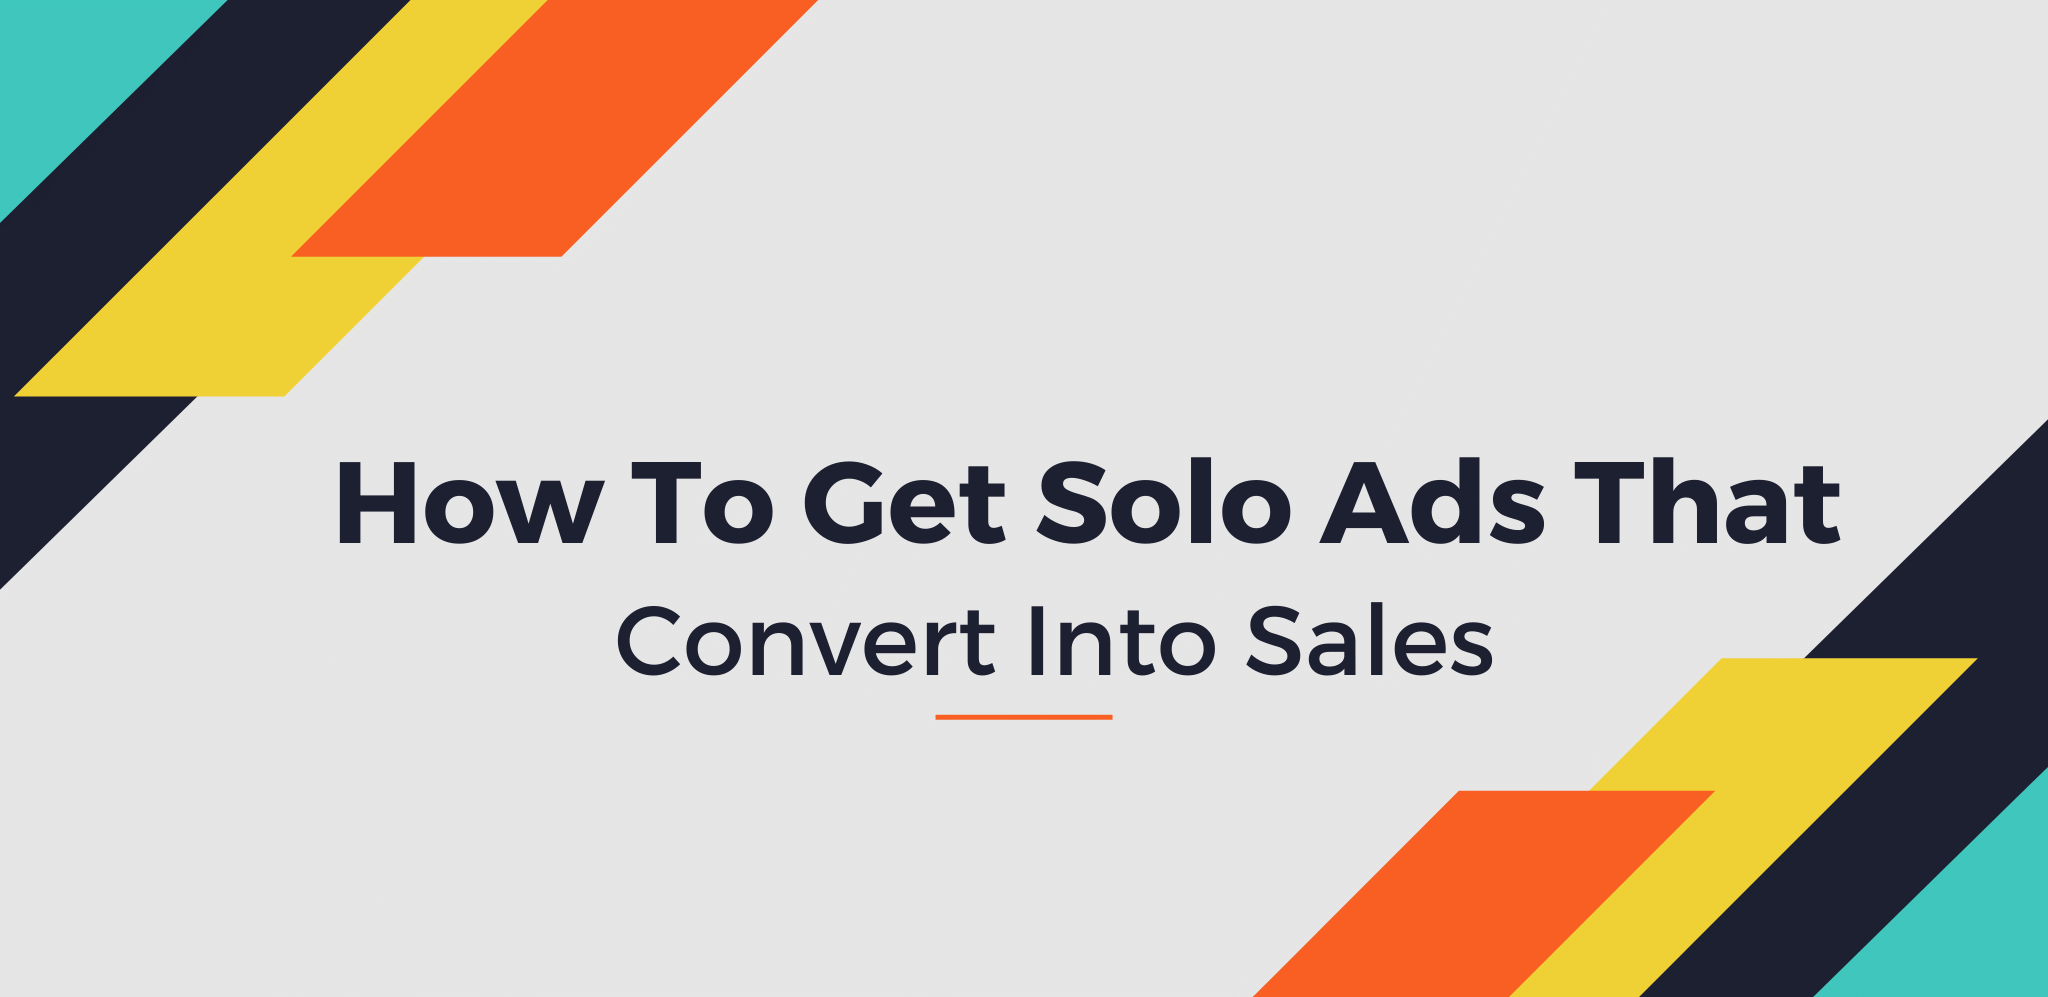 How To Get Solo Ads That Convert Into Sales